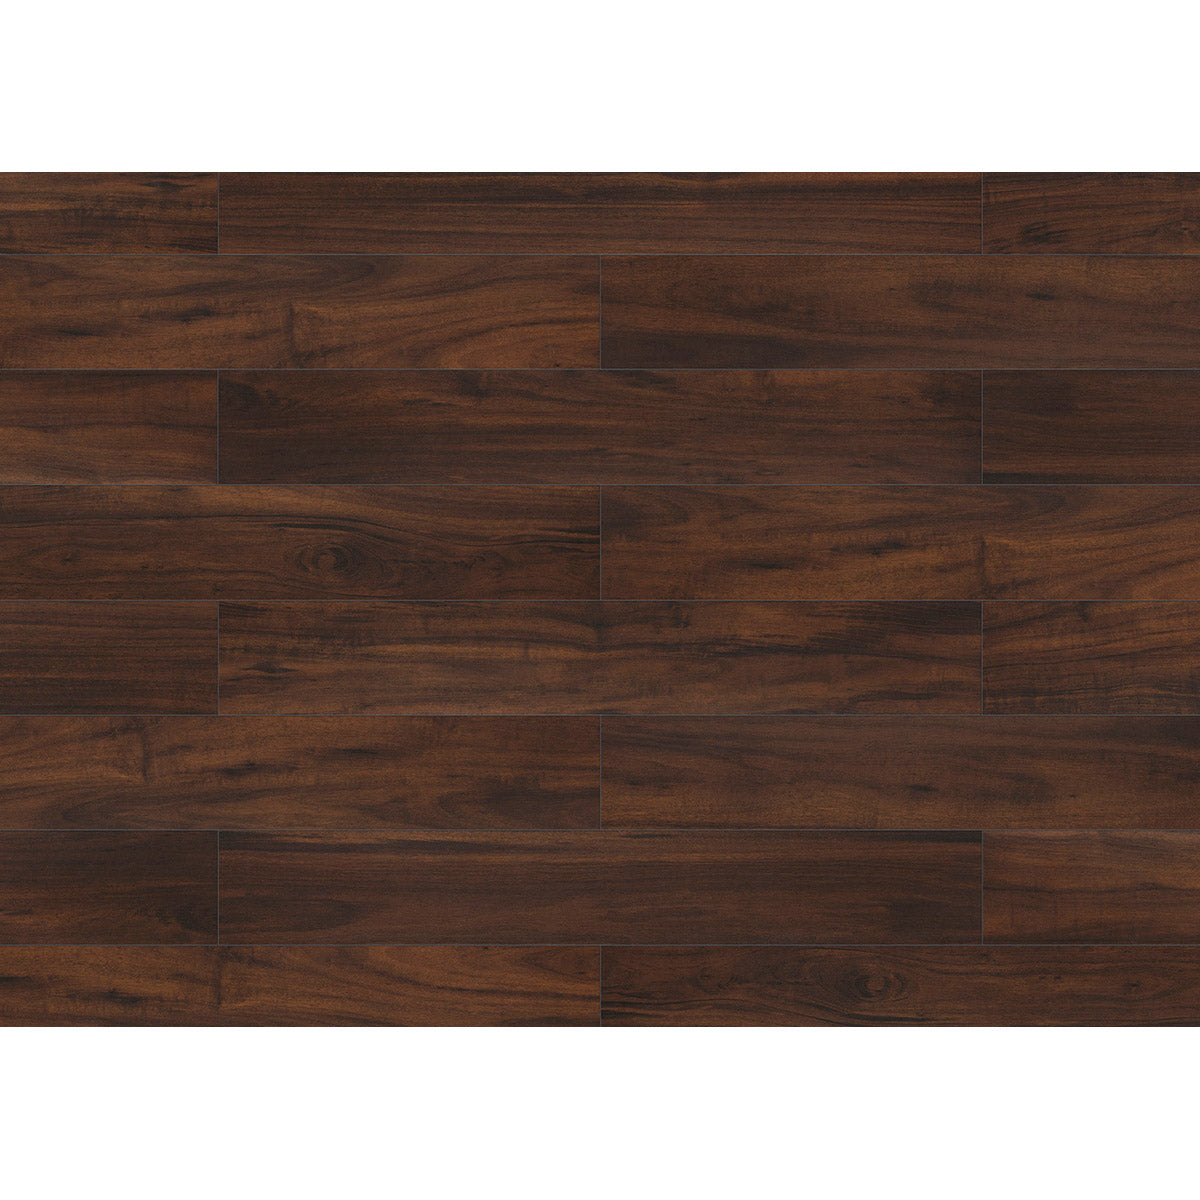 Inhaus - Solido Visions Collection - Brazilian Walnut Installed